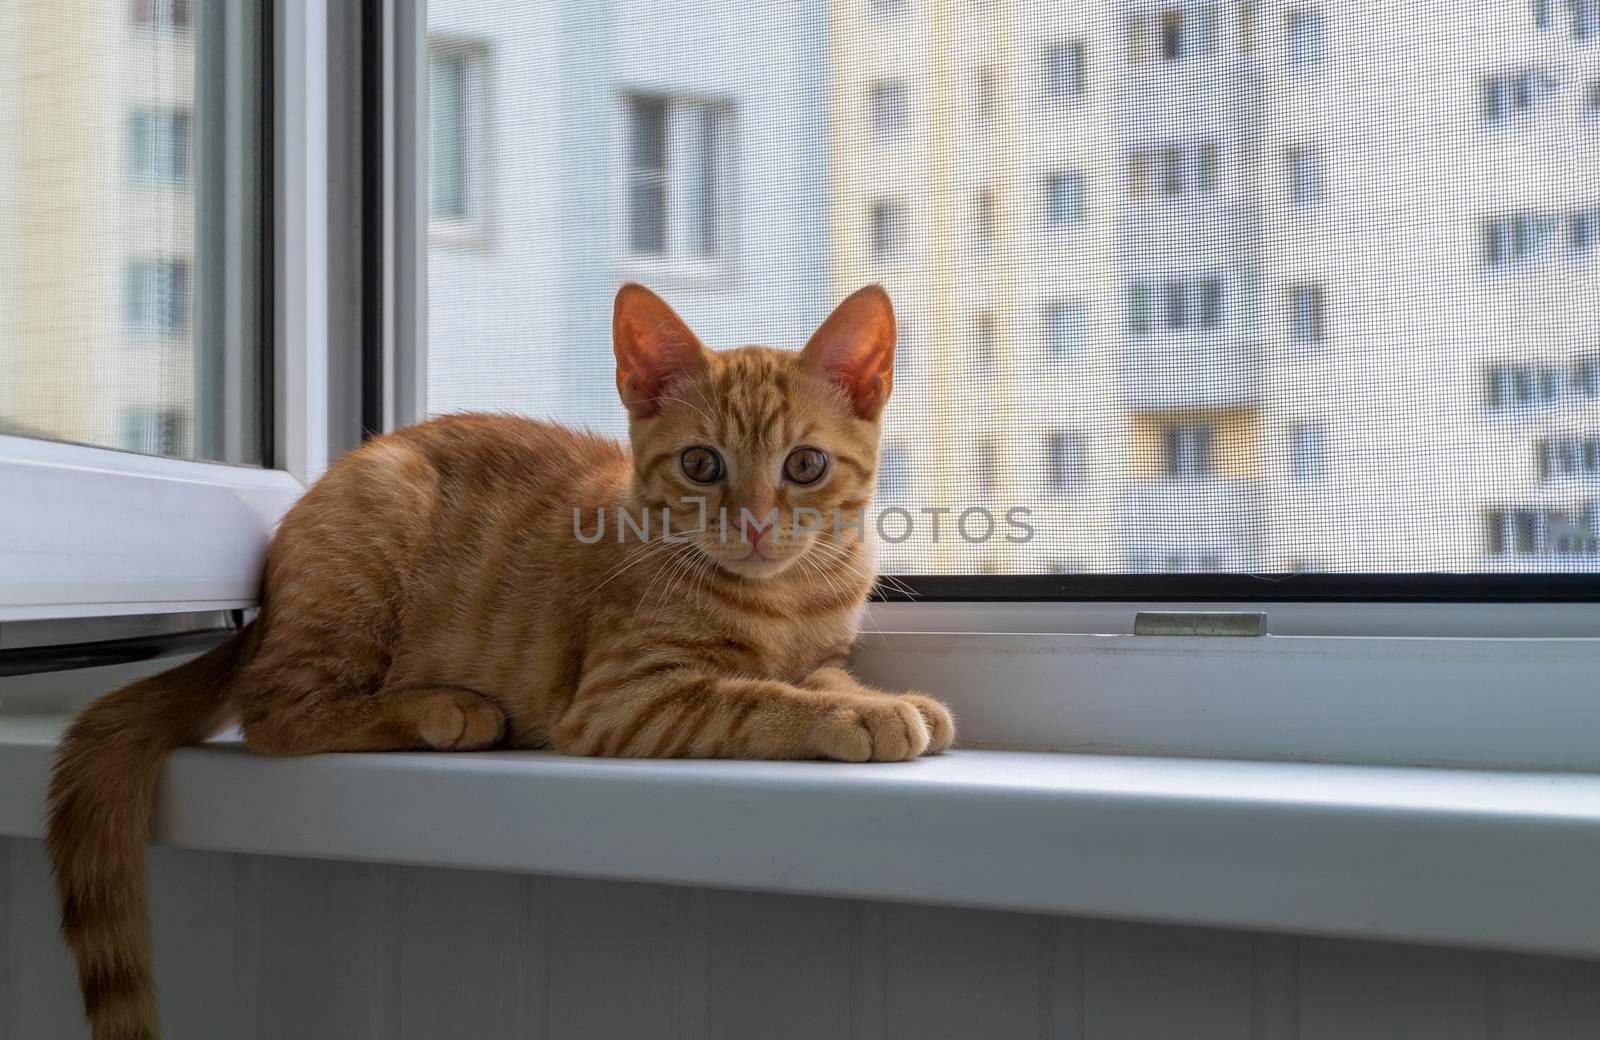 Kitten on the window sill with protective mosquito and anti-cat net by OlgaGubskaya